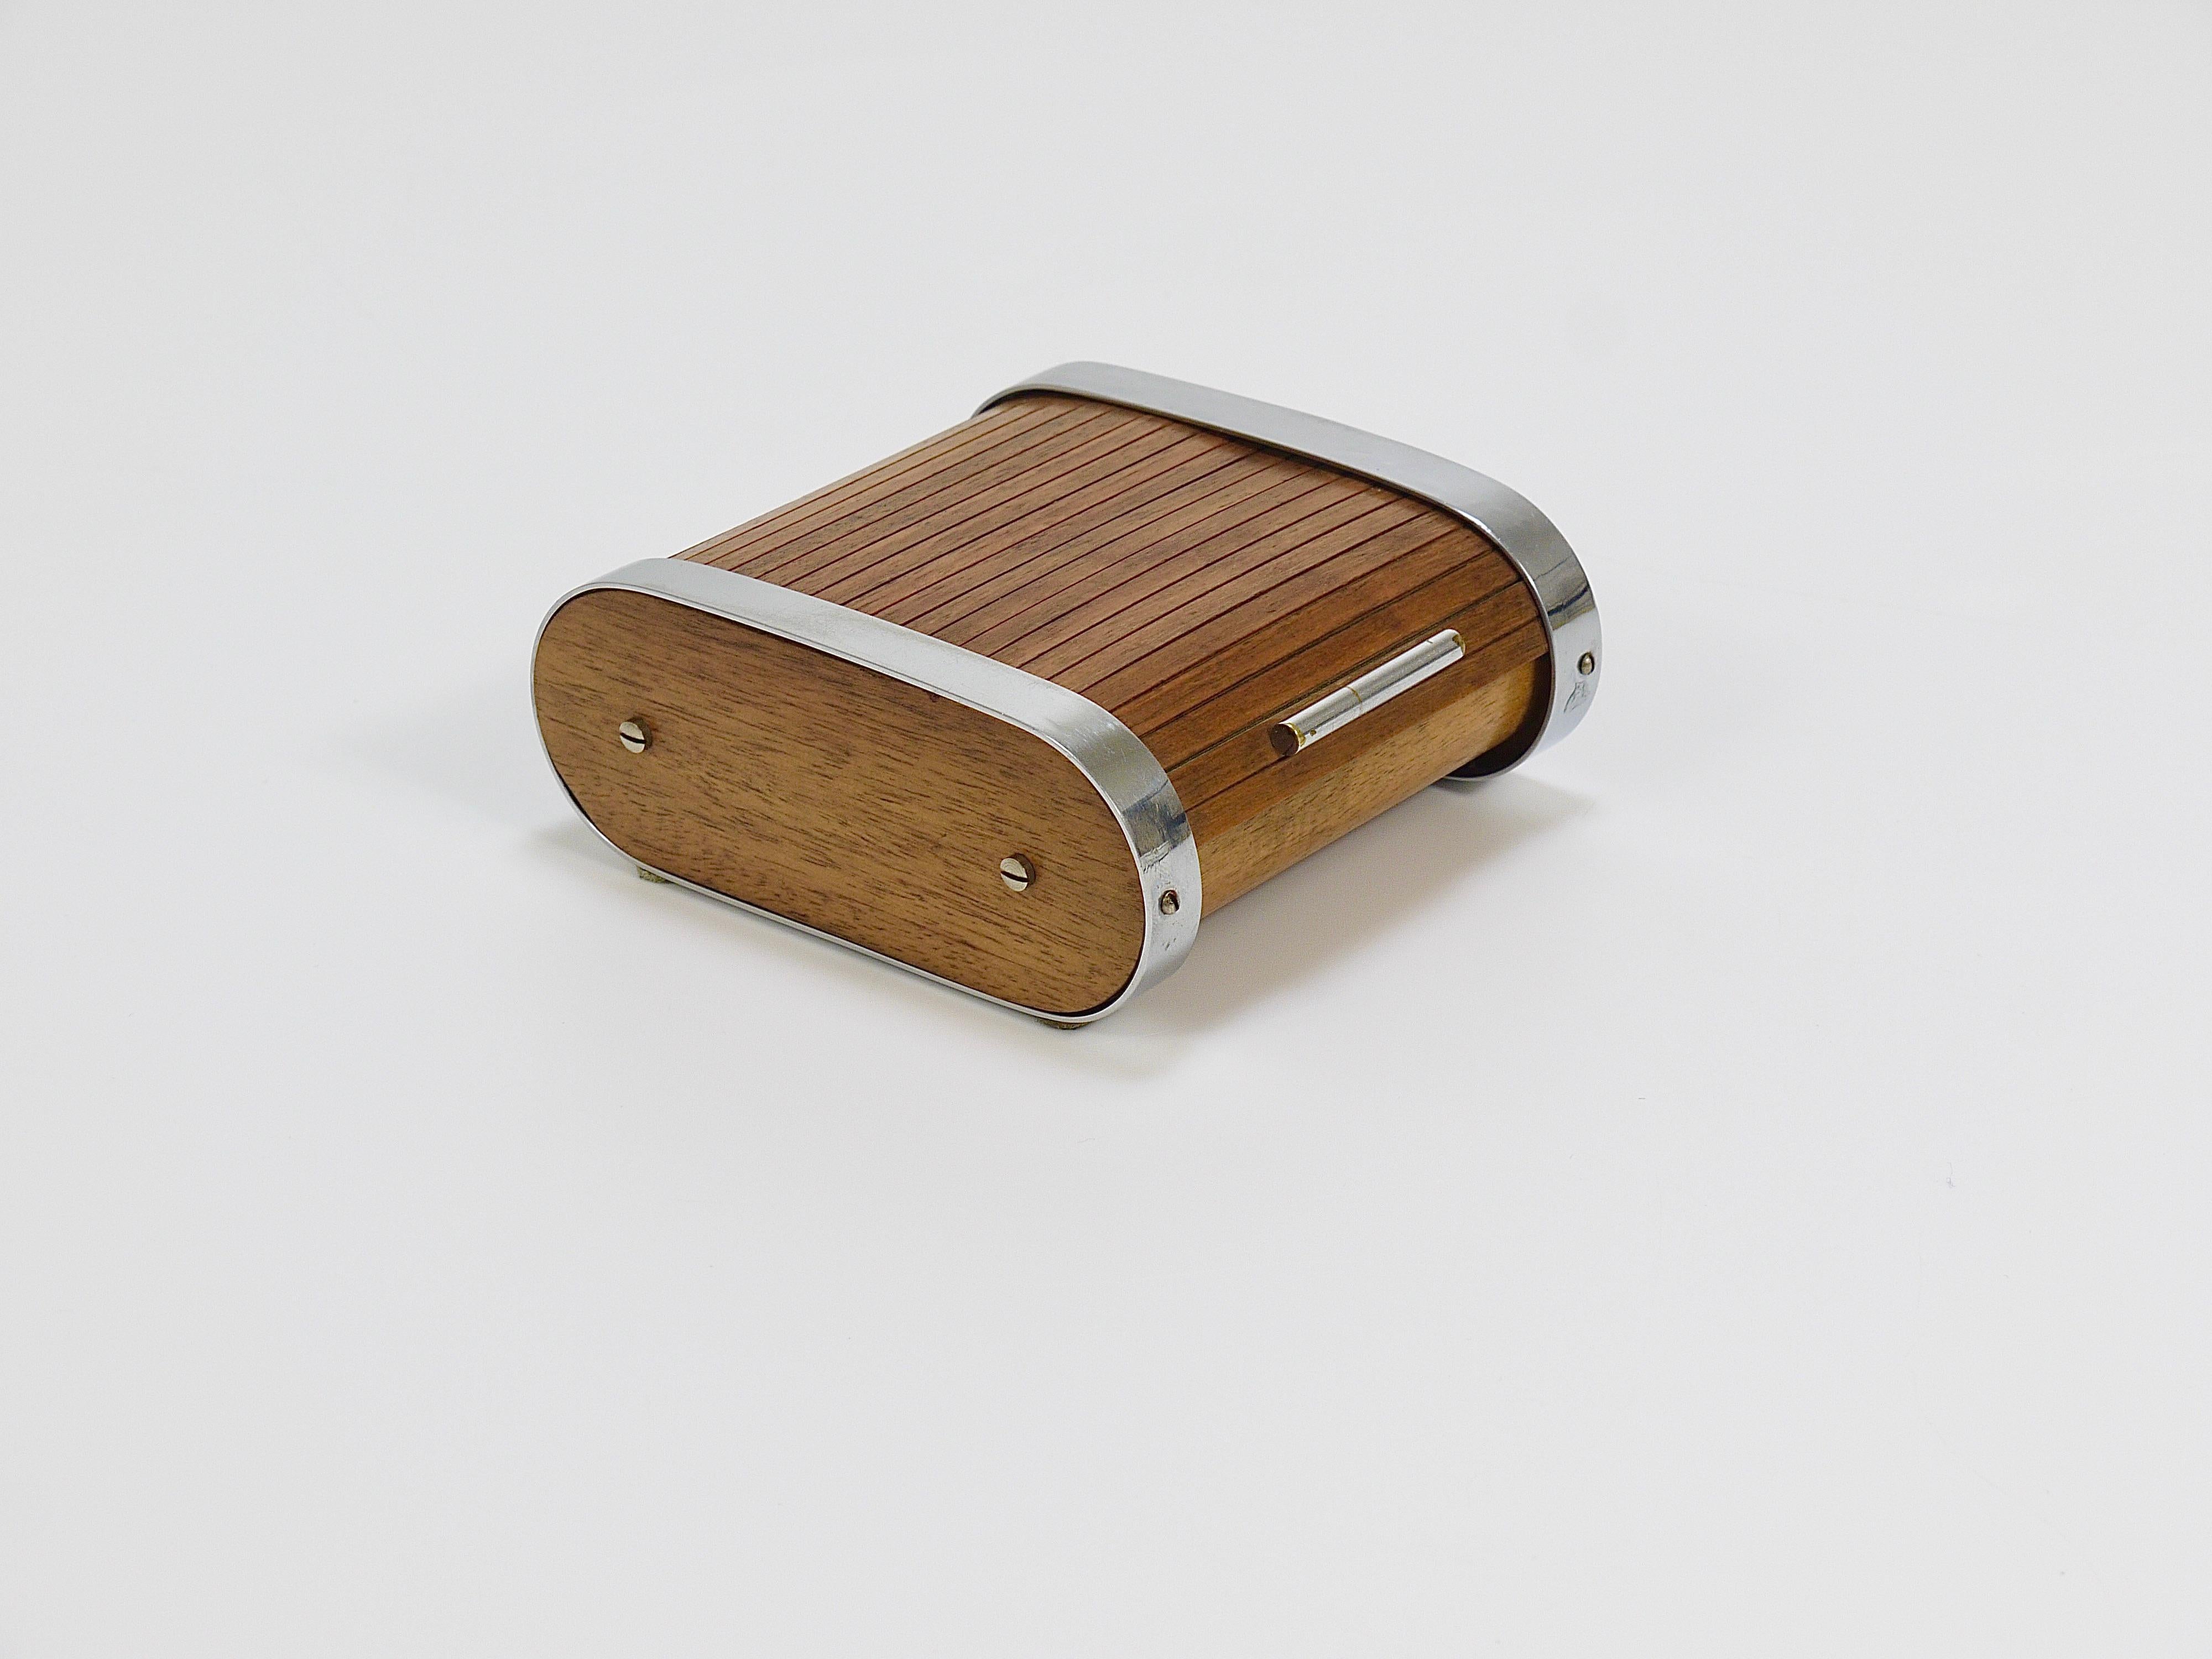 A rare storage box or cigarette dispenser with a roll down lid from the 1930s, this is an early design by Carl Aubock I. Handmade of walnut wood and nickel-plated brass. In good condition.